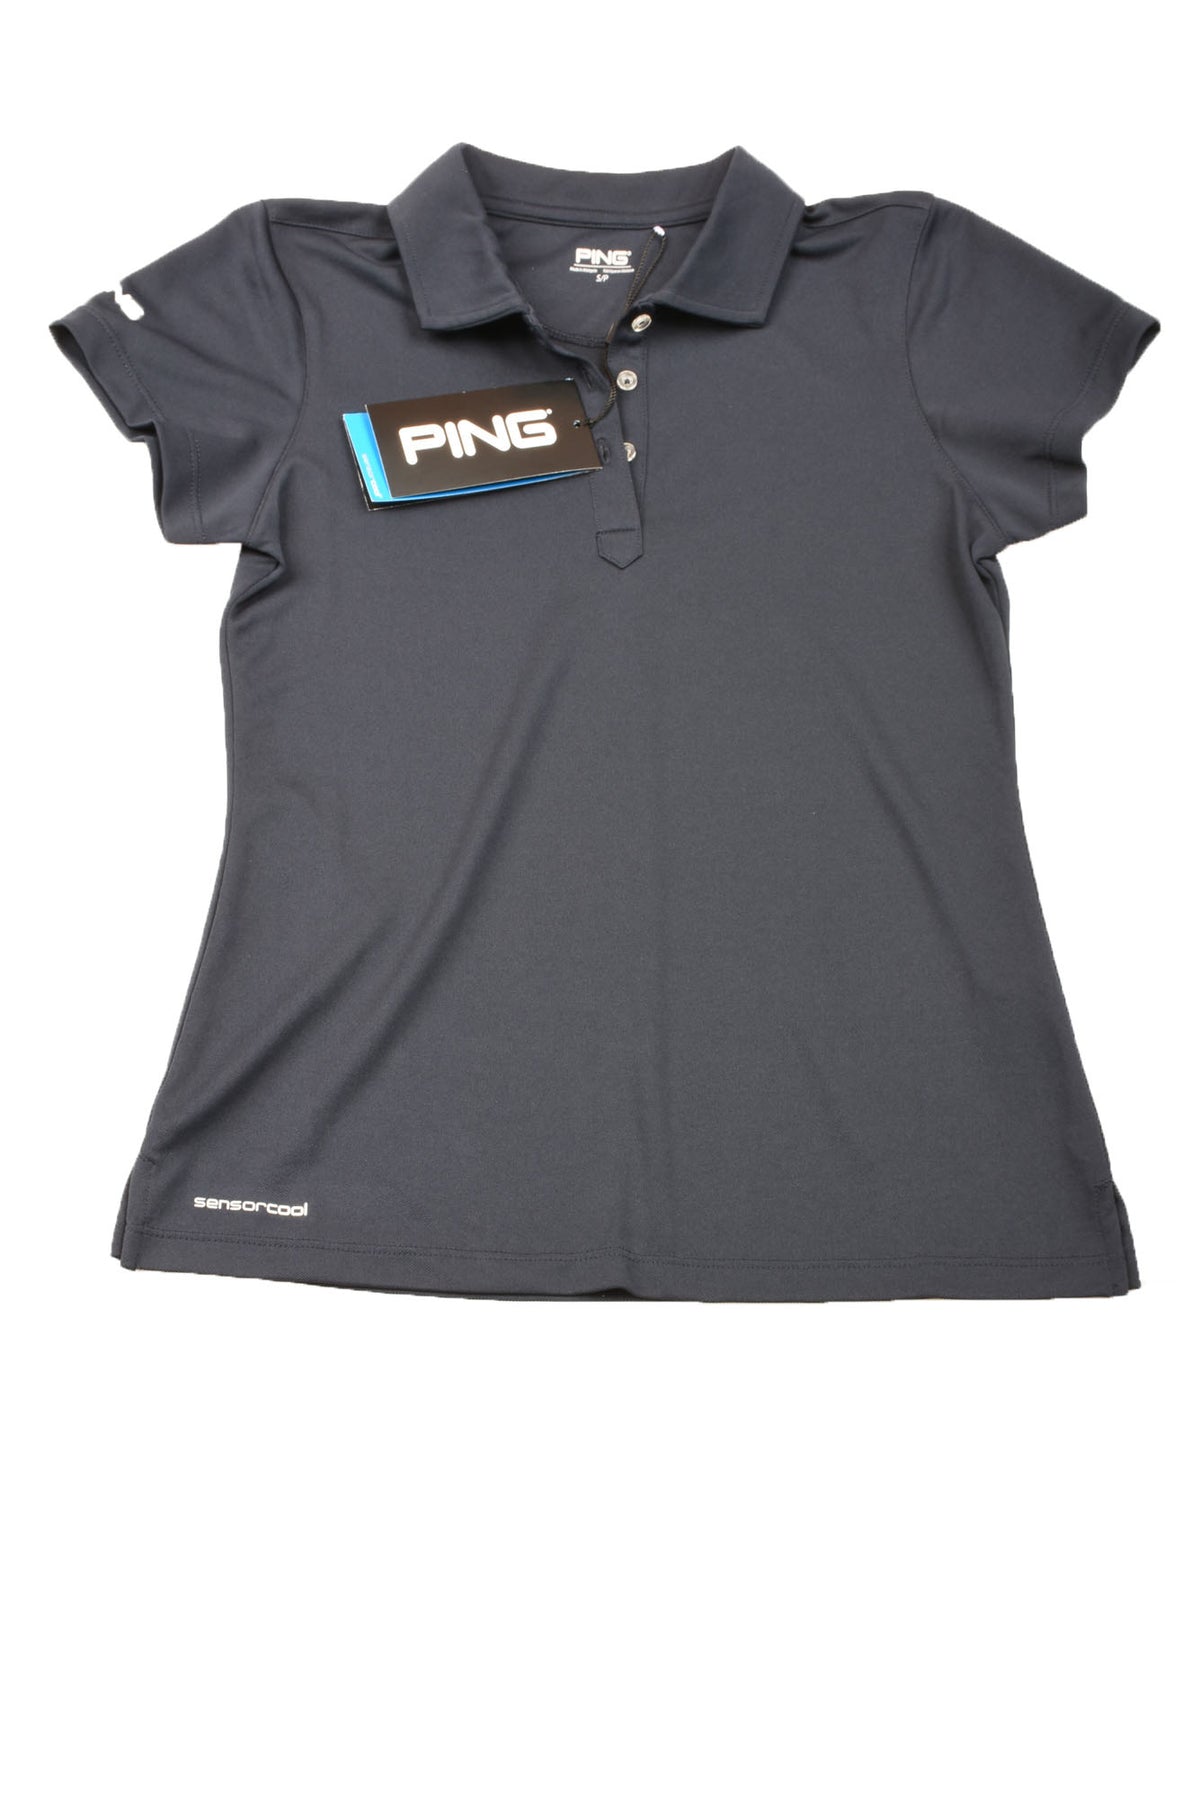 Ping Size Petite Small Women&#39;s Activewear Top